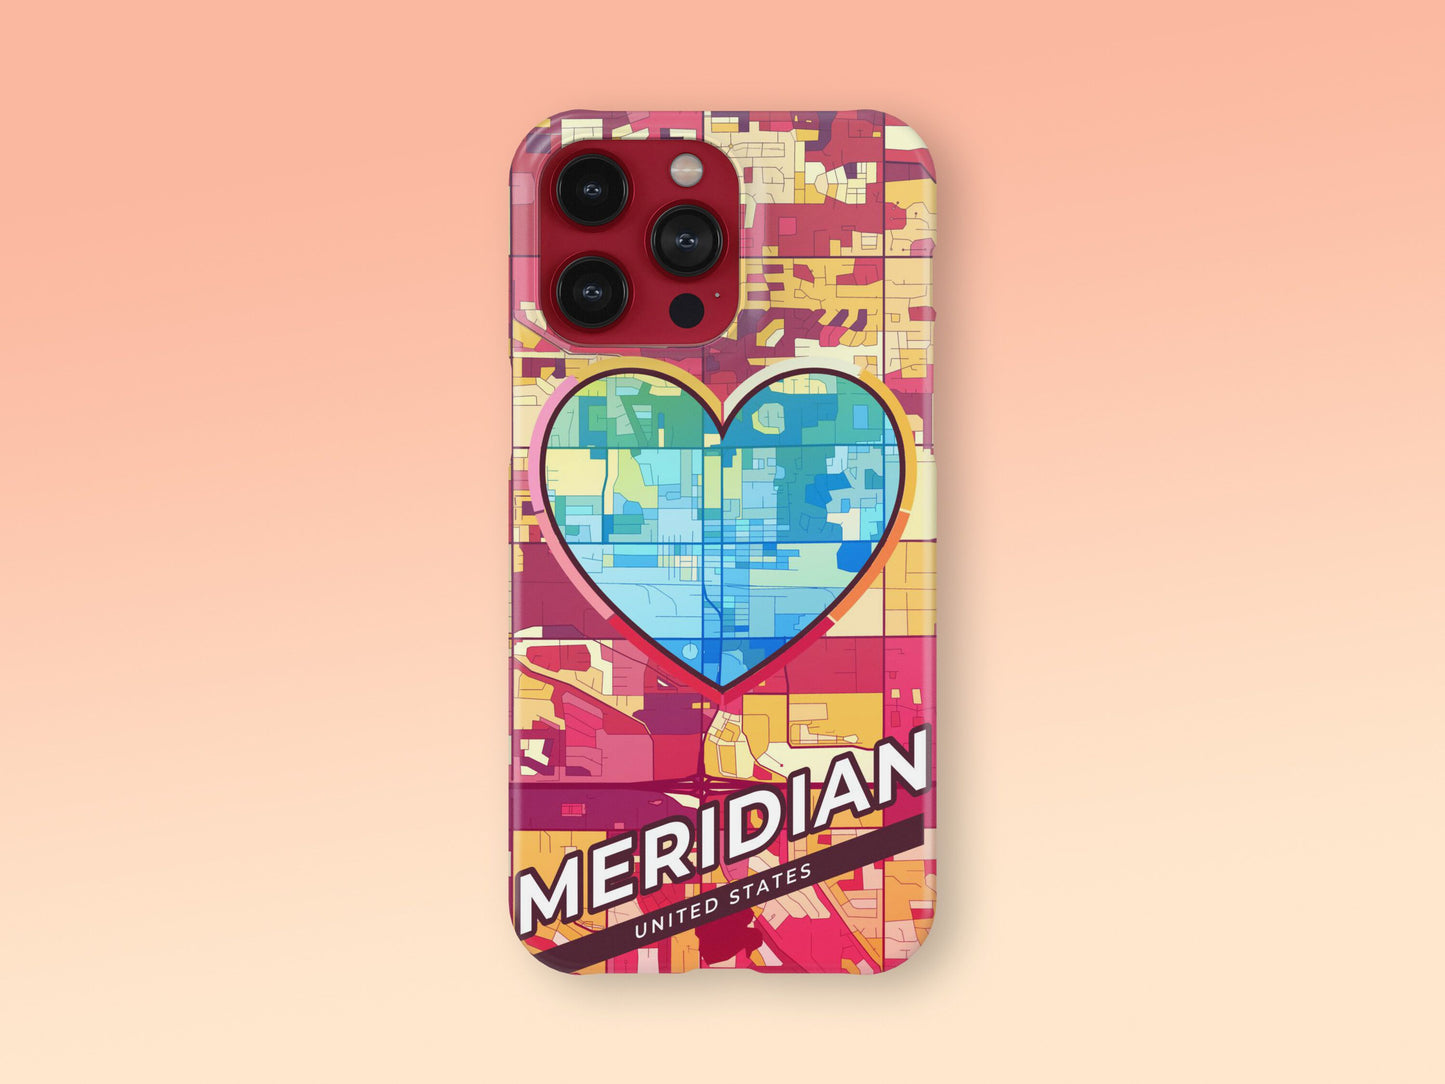 Meridian Idaho slim phone case with colorful icon 2